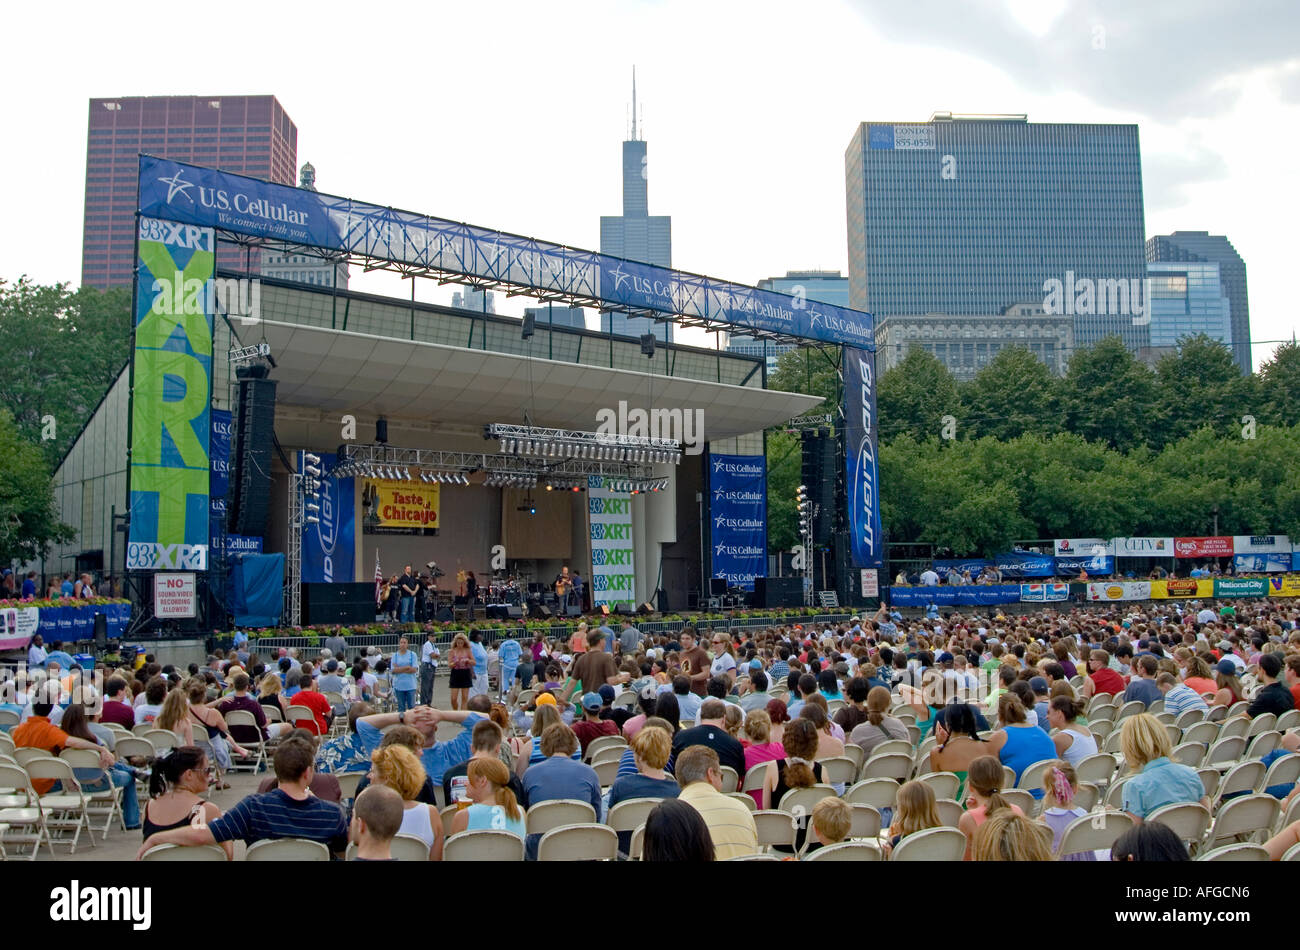 Taste of Chicago Band Stage Stock Photo 7966037 Alamy